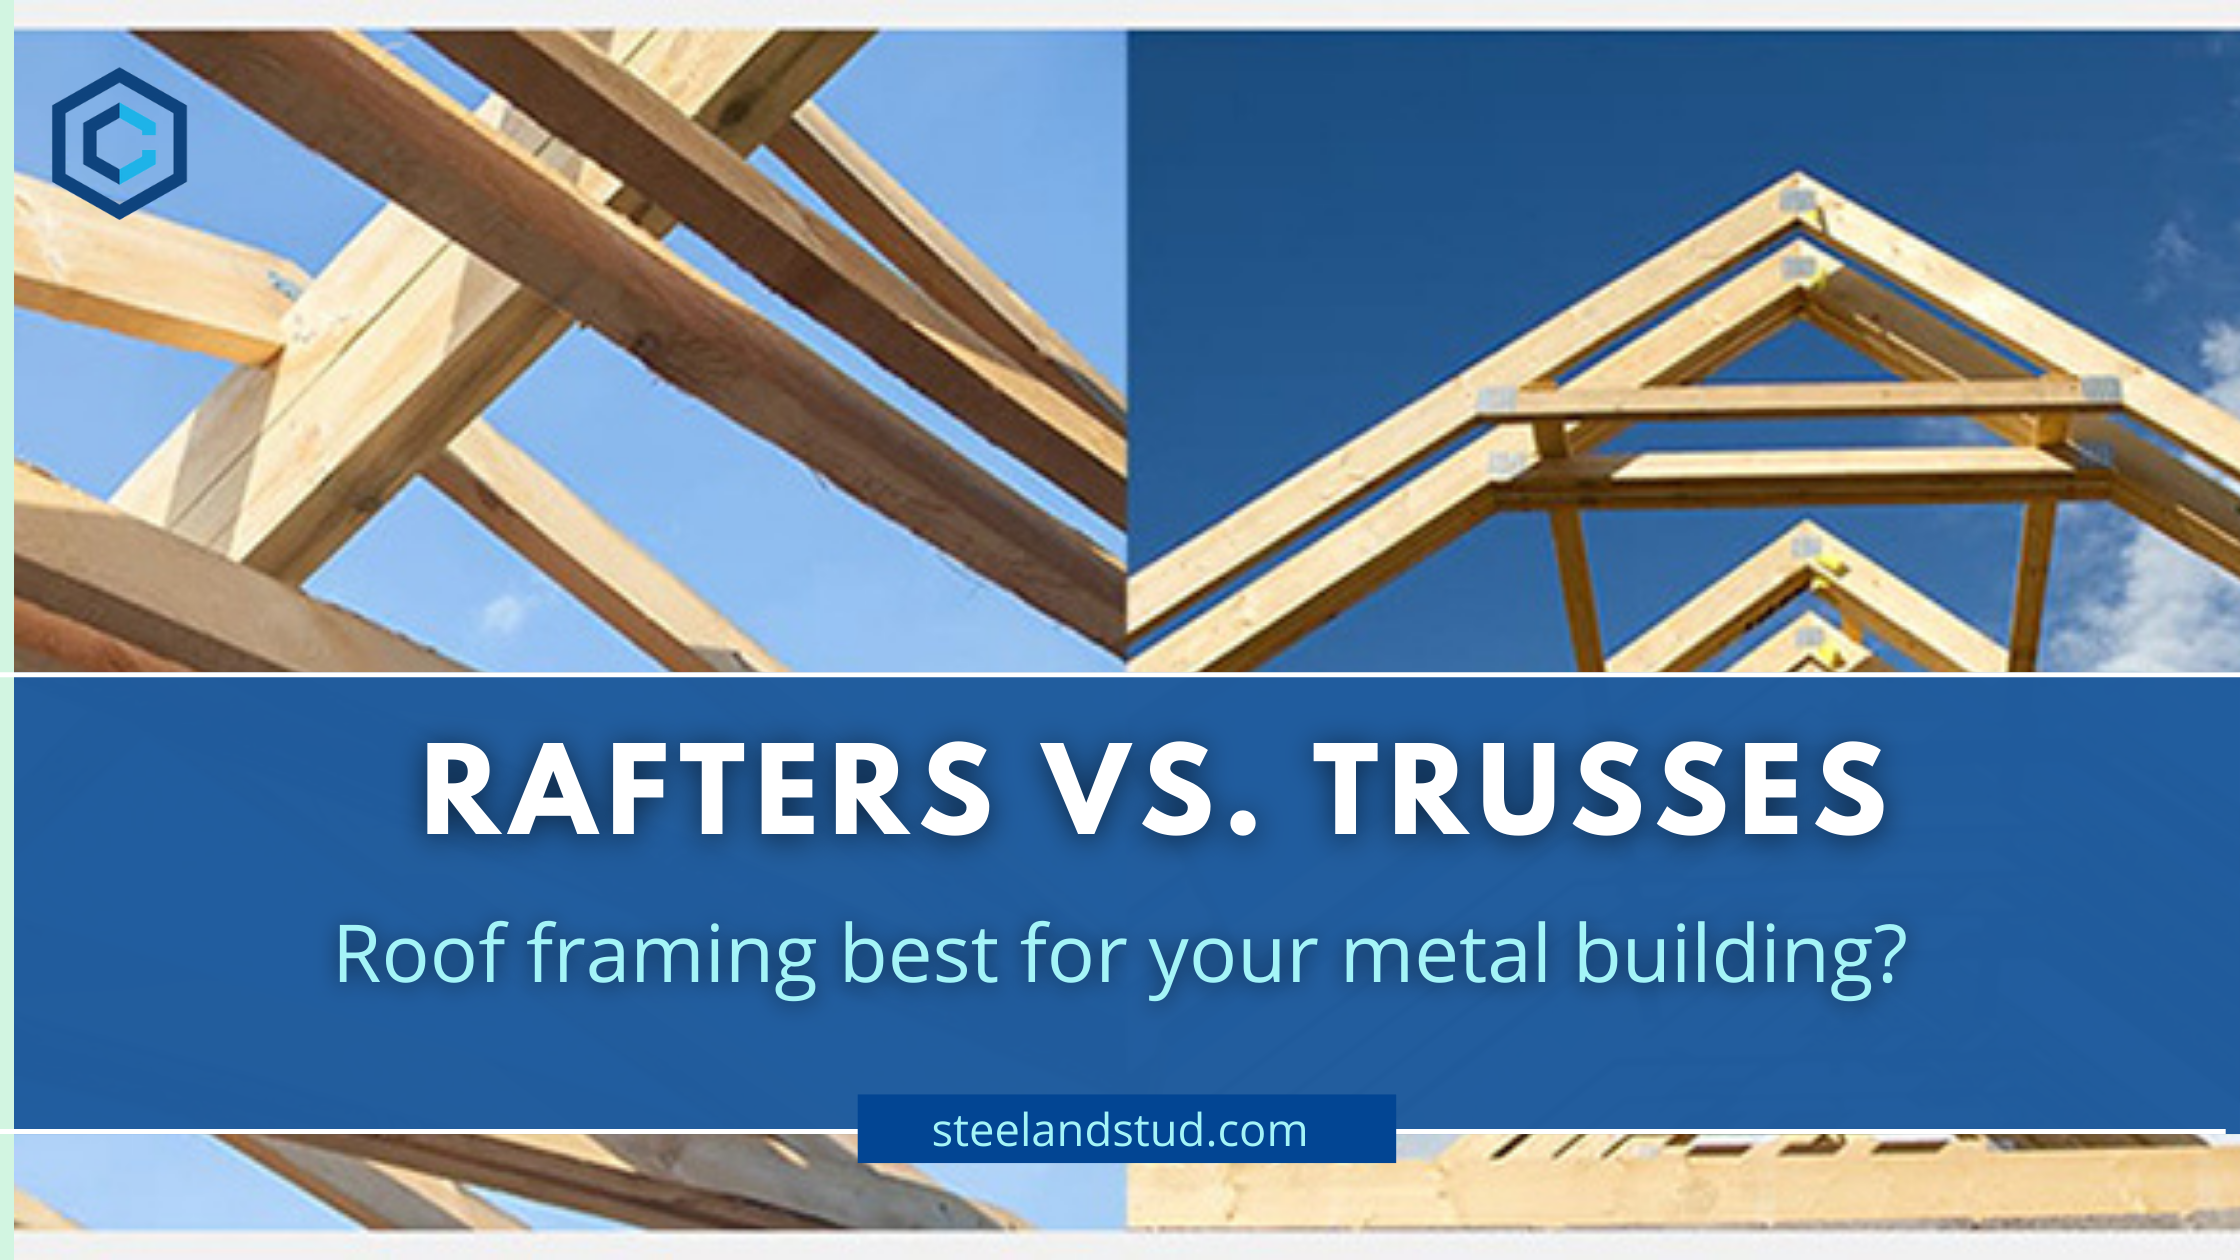 Rafters vs. trusses -roof framing best for your metal building?